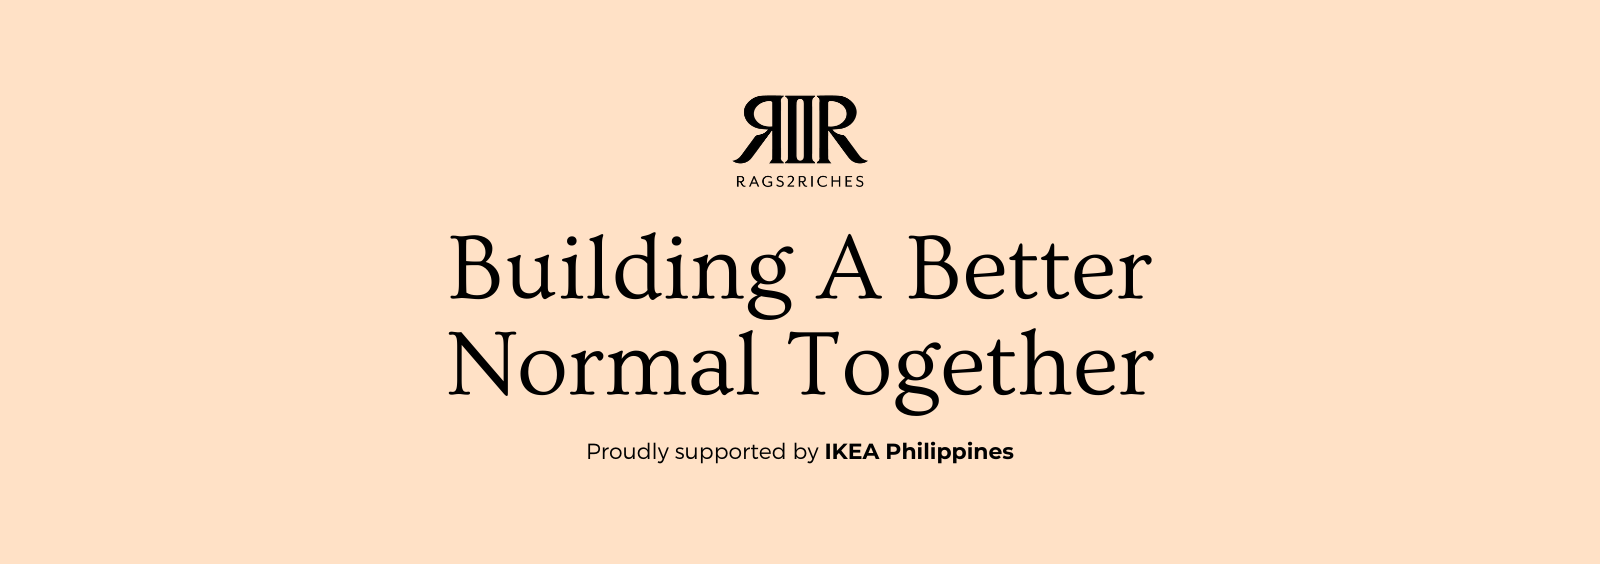 Building A Better Normal Together with IKEA Philippines